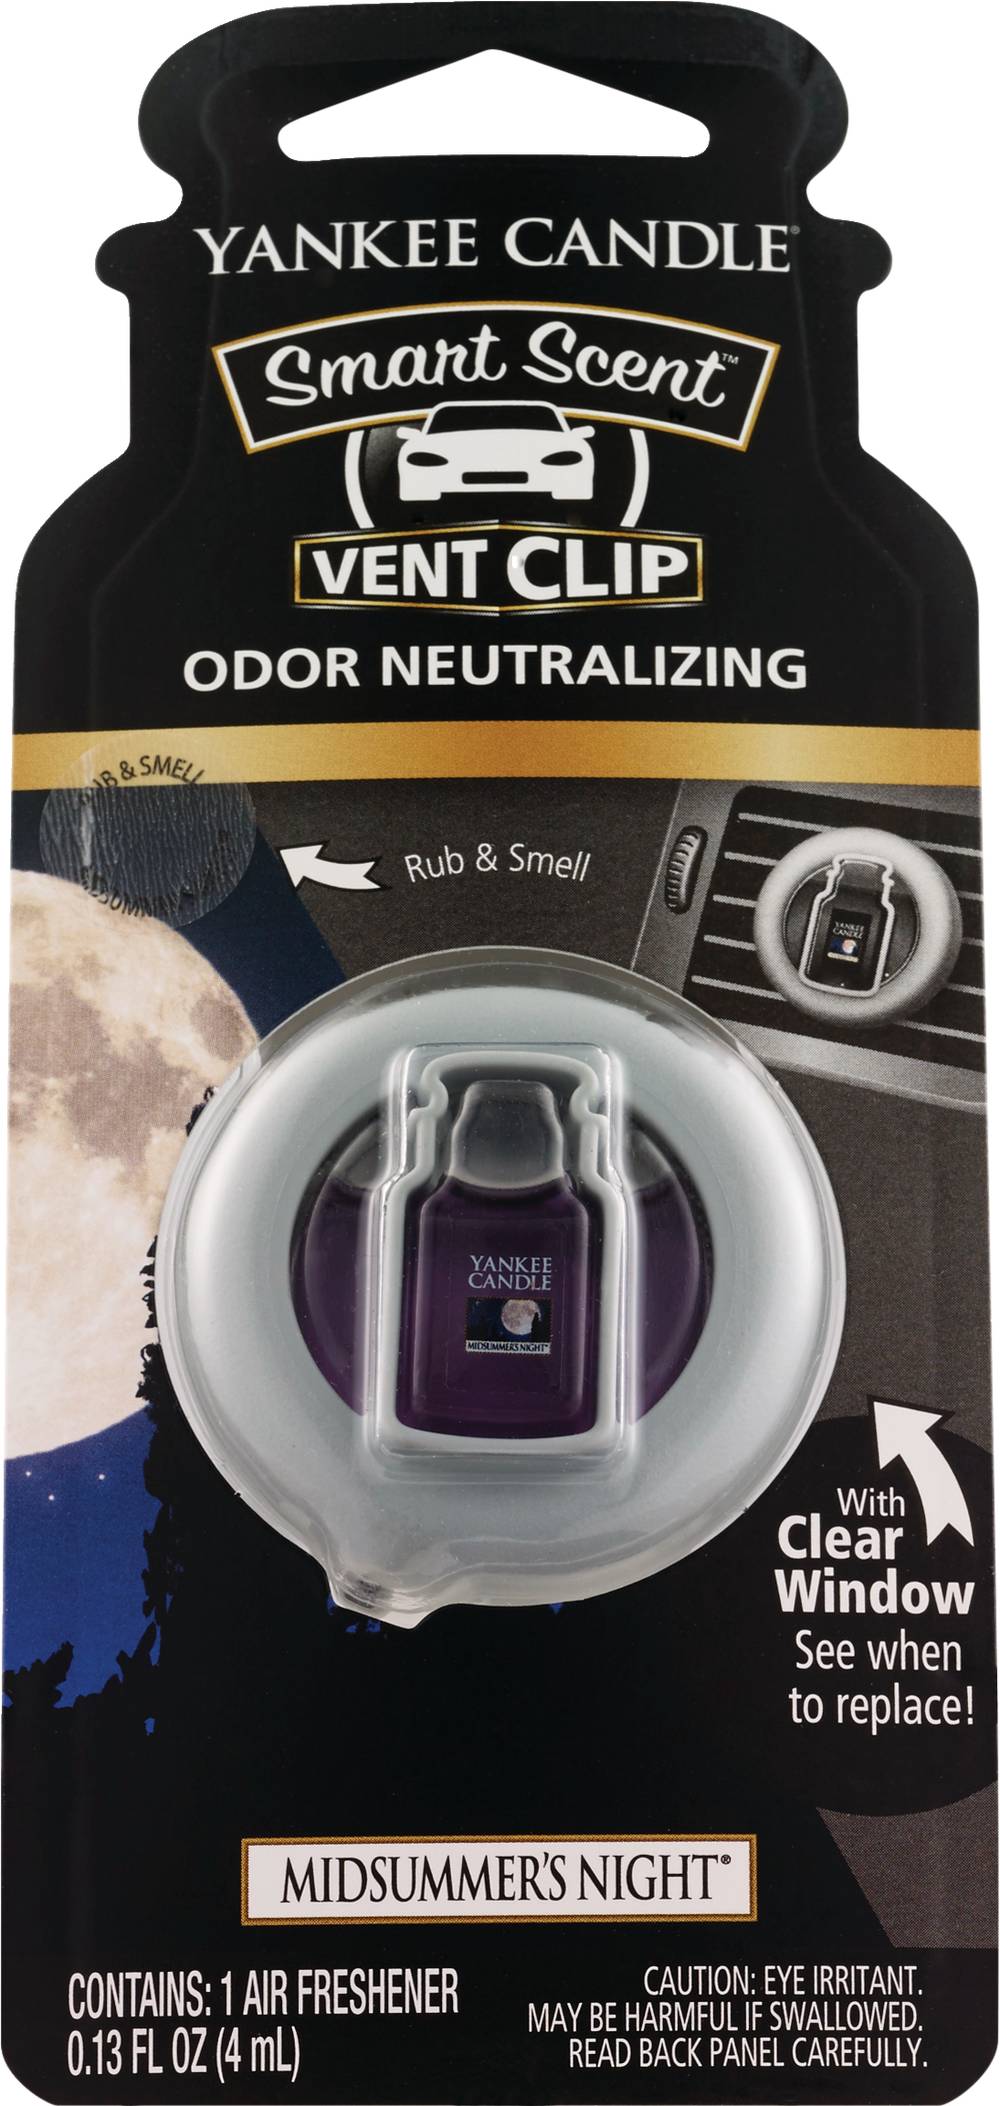 Yankee Candle Smart Scent Odor Neutralizing Car Vent Clip Air Freshener, Midsummer's Night